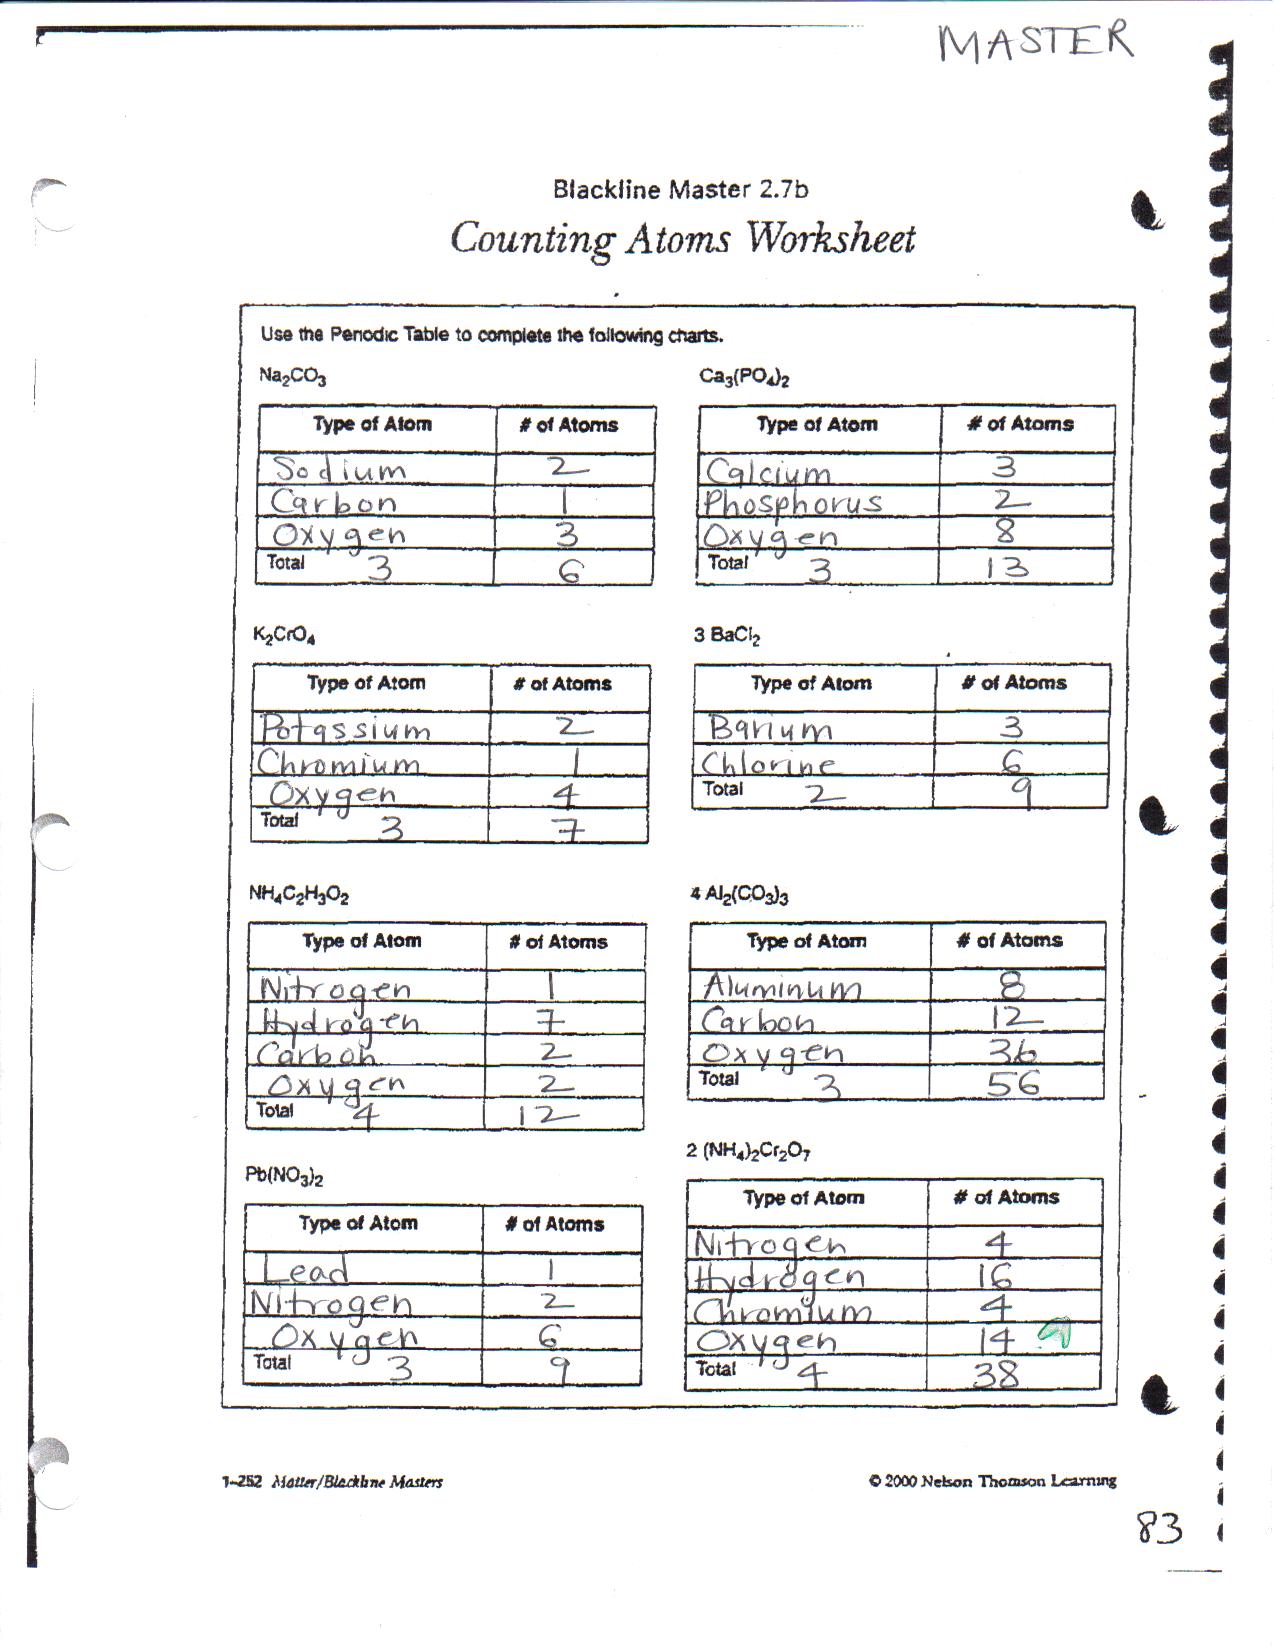 counting-atoms-and-elements-lesson-plan-a-complete-science-lesson-using-the-5e-method-of